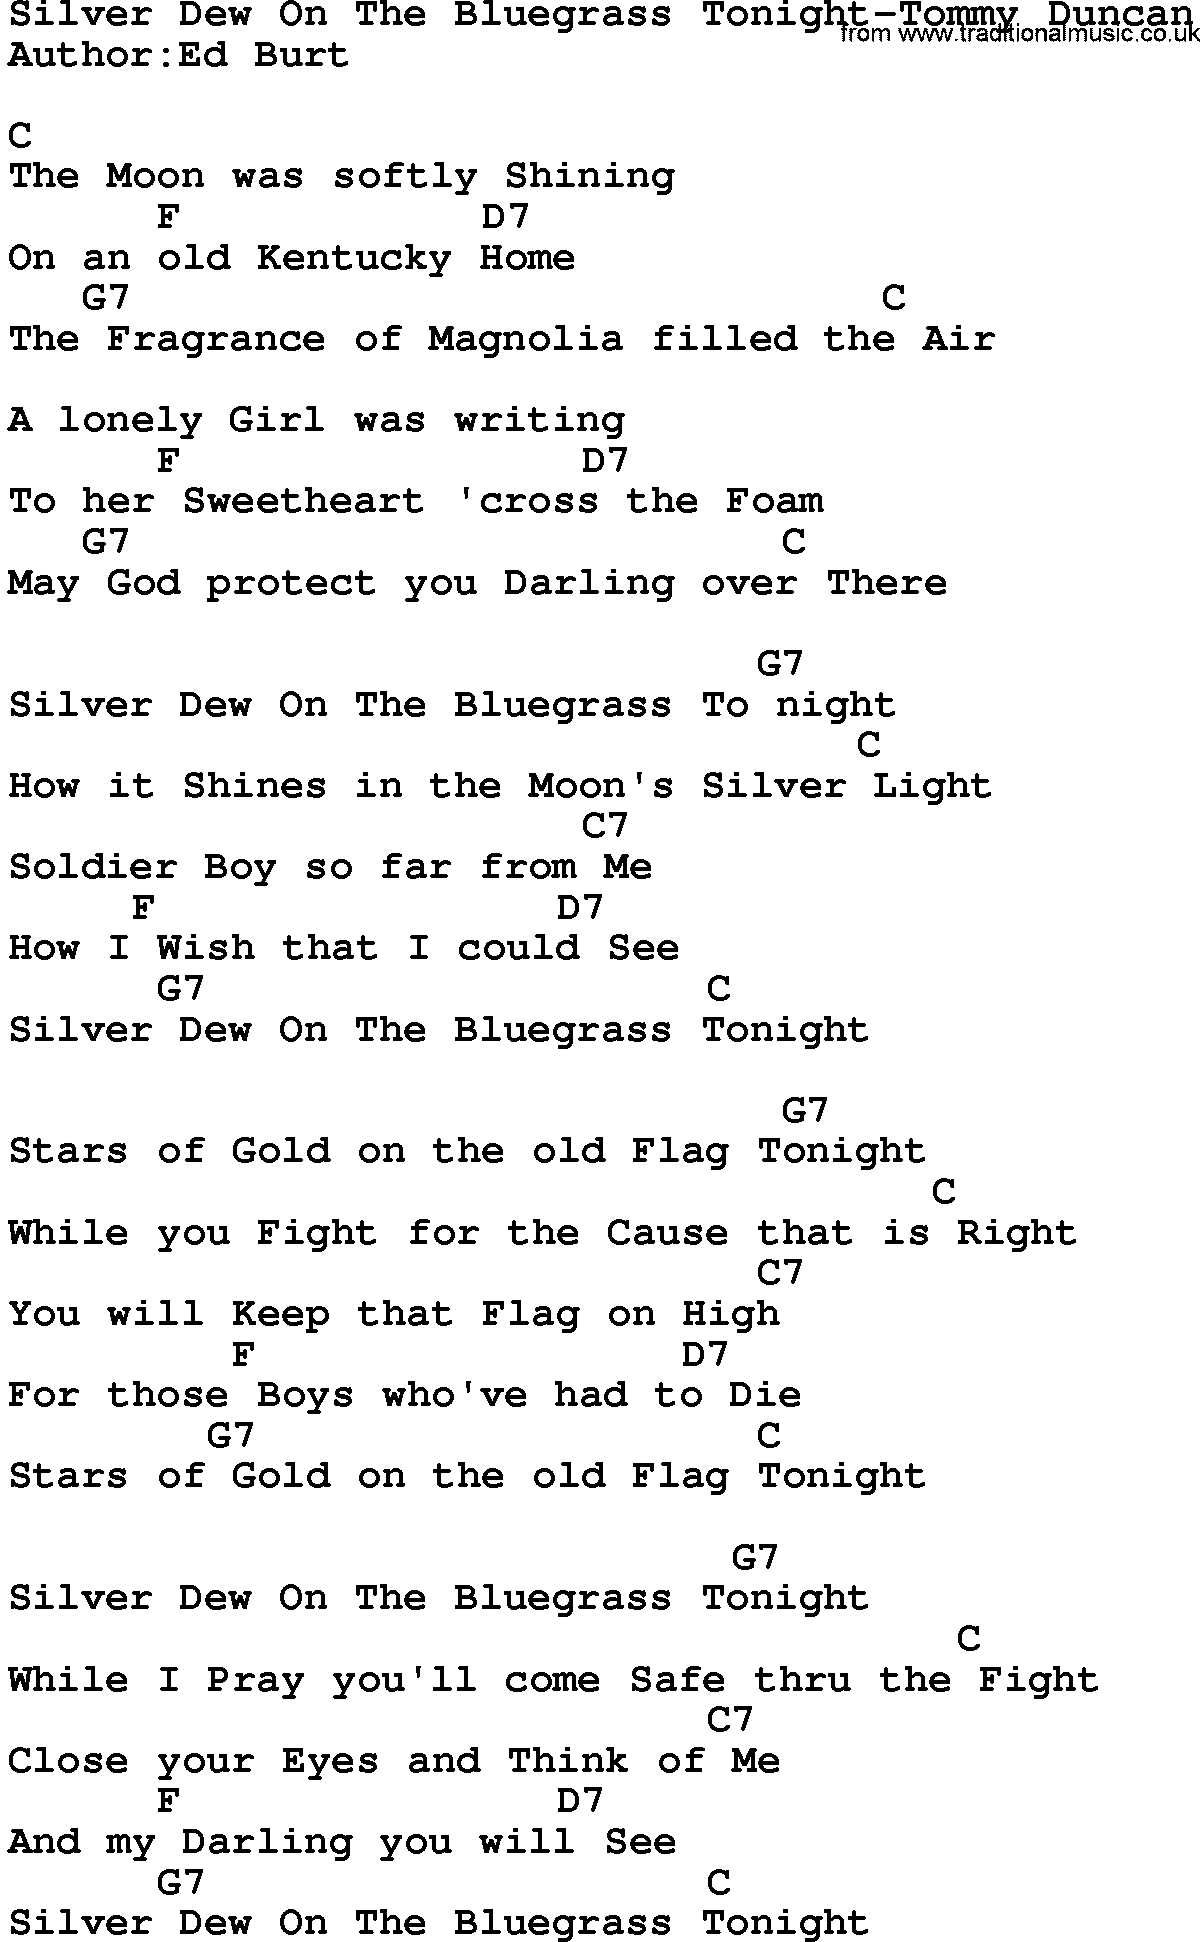 Country music song: Silver Dew On The Bluegrass Tonight-Tommy Duncan lyrics and chords